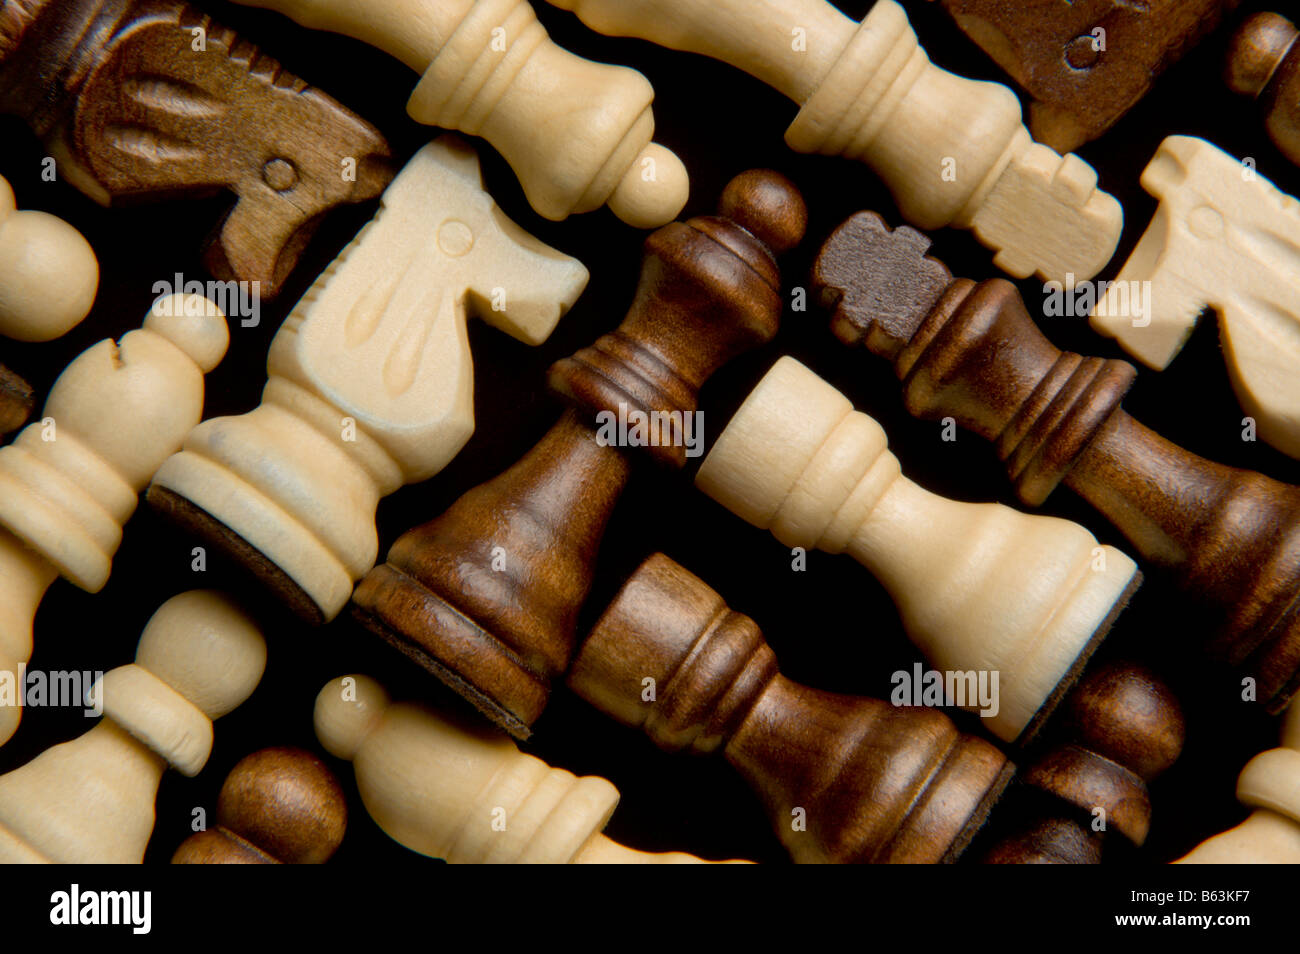 Chess pieces laid down in a group Stock Photo